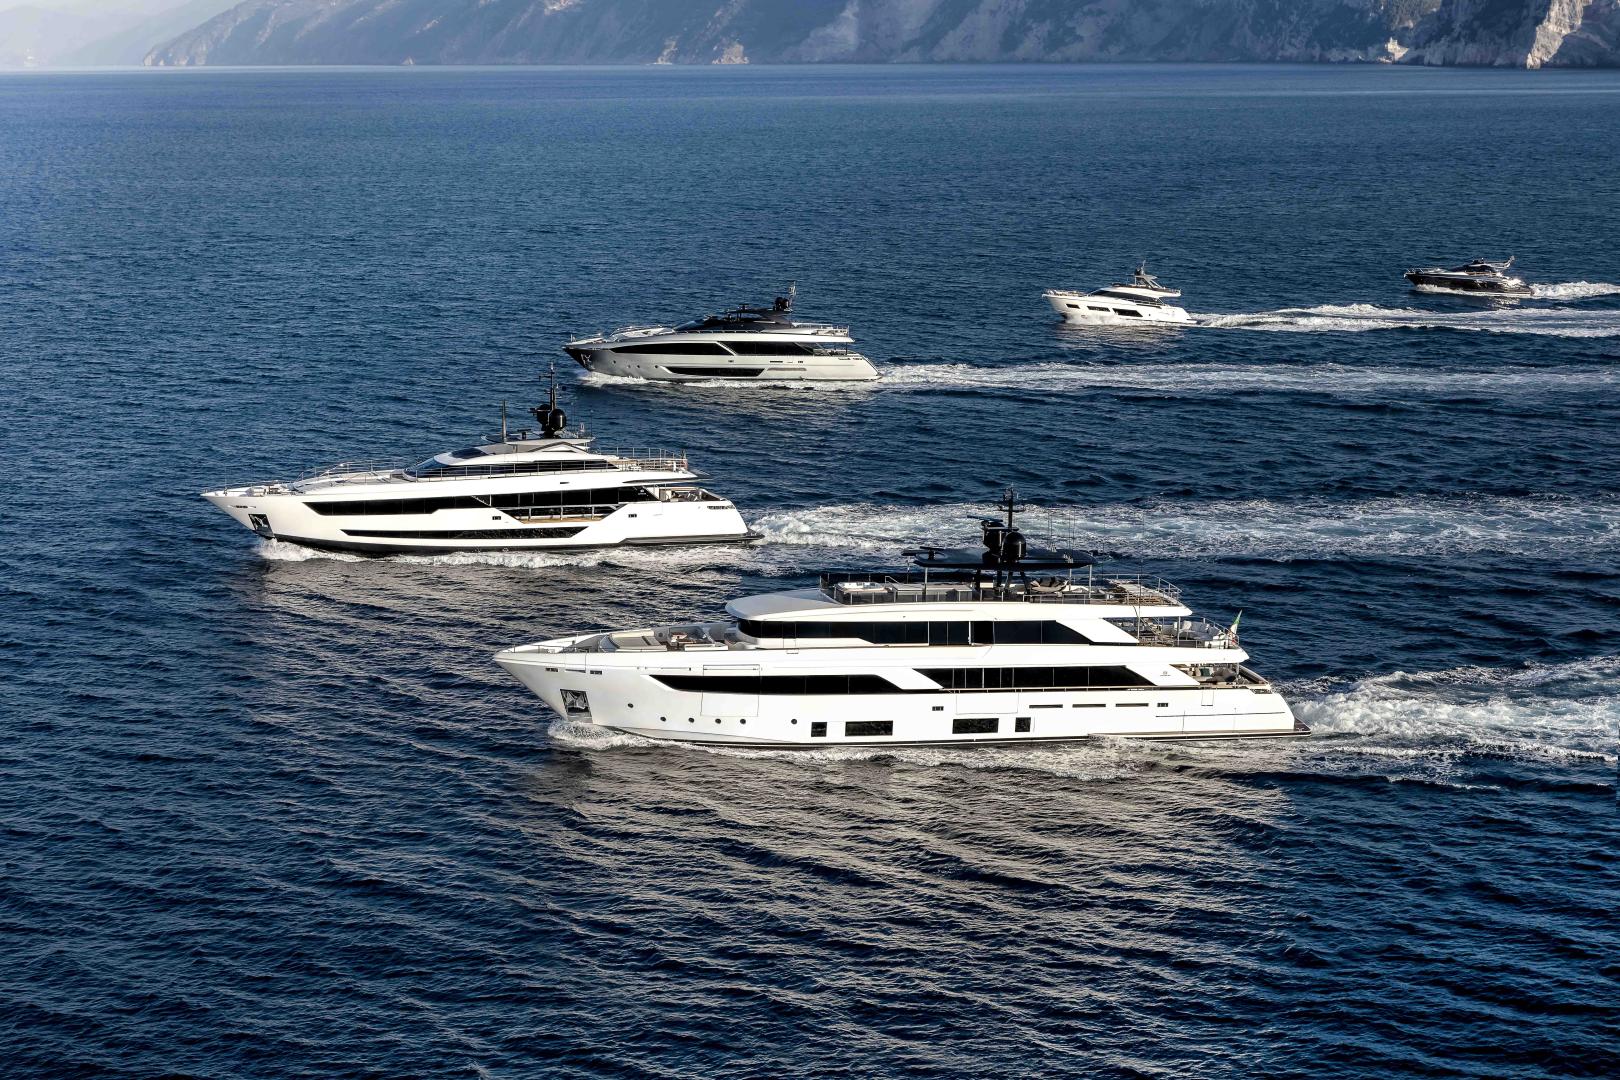 Ferretti Group confirms its second place in the world's top nautical market 2019